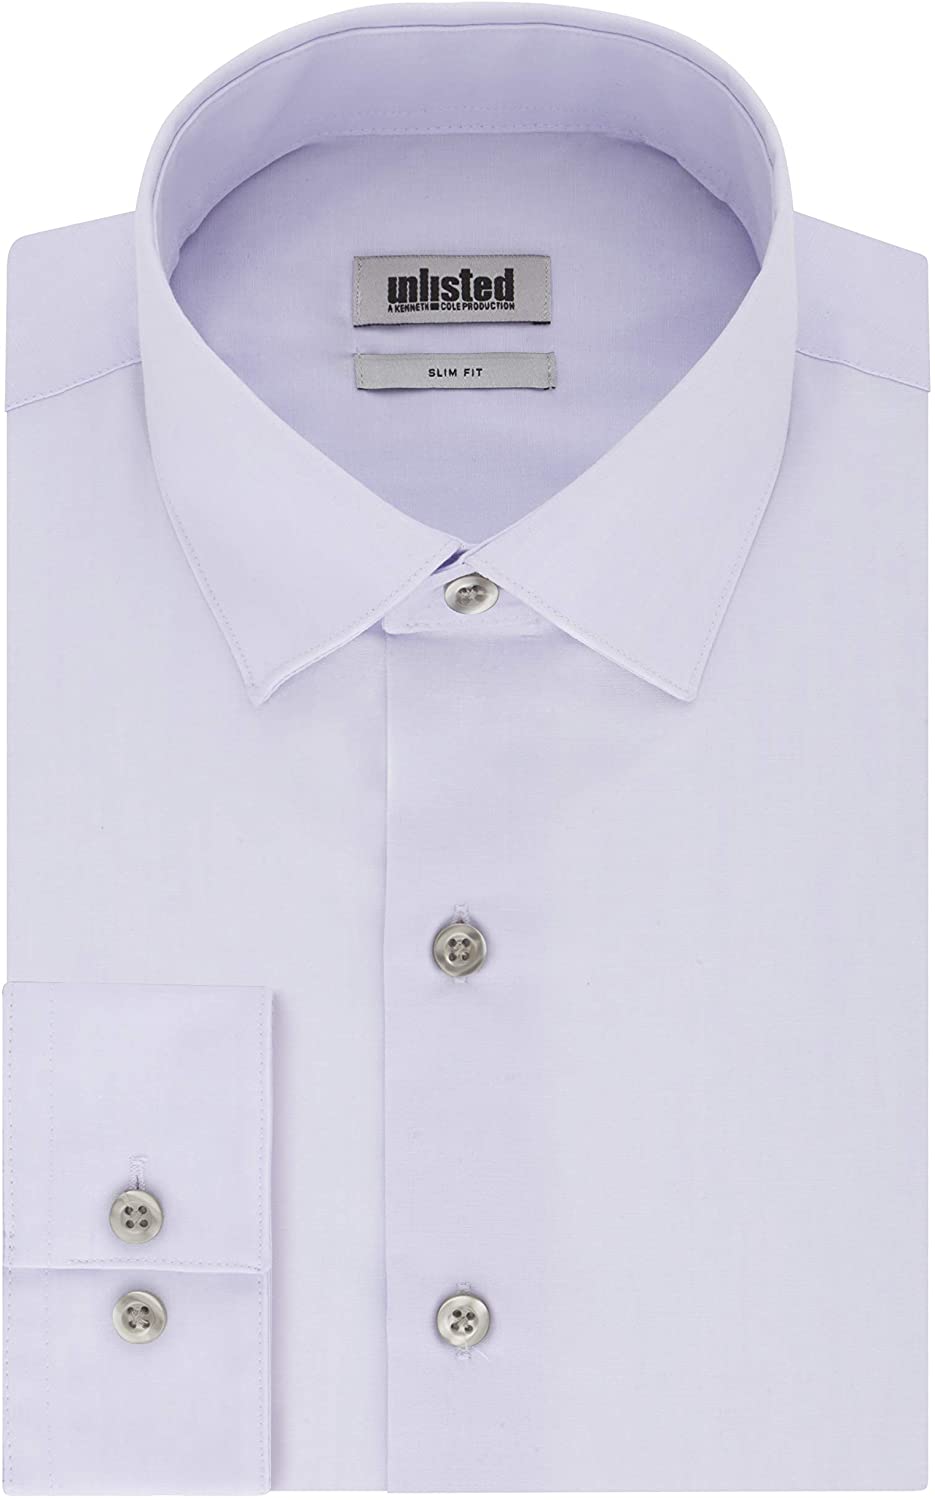  Kenneth Cole Unlisted Men's Dress Shirt Slim Fit Solid